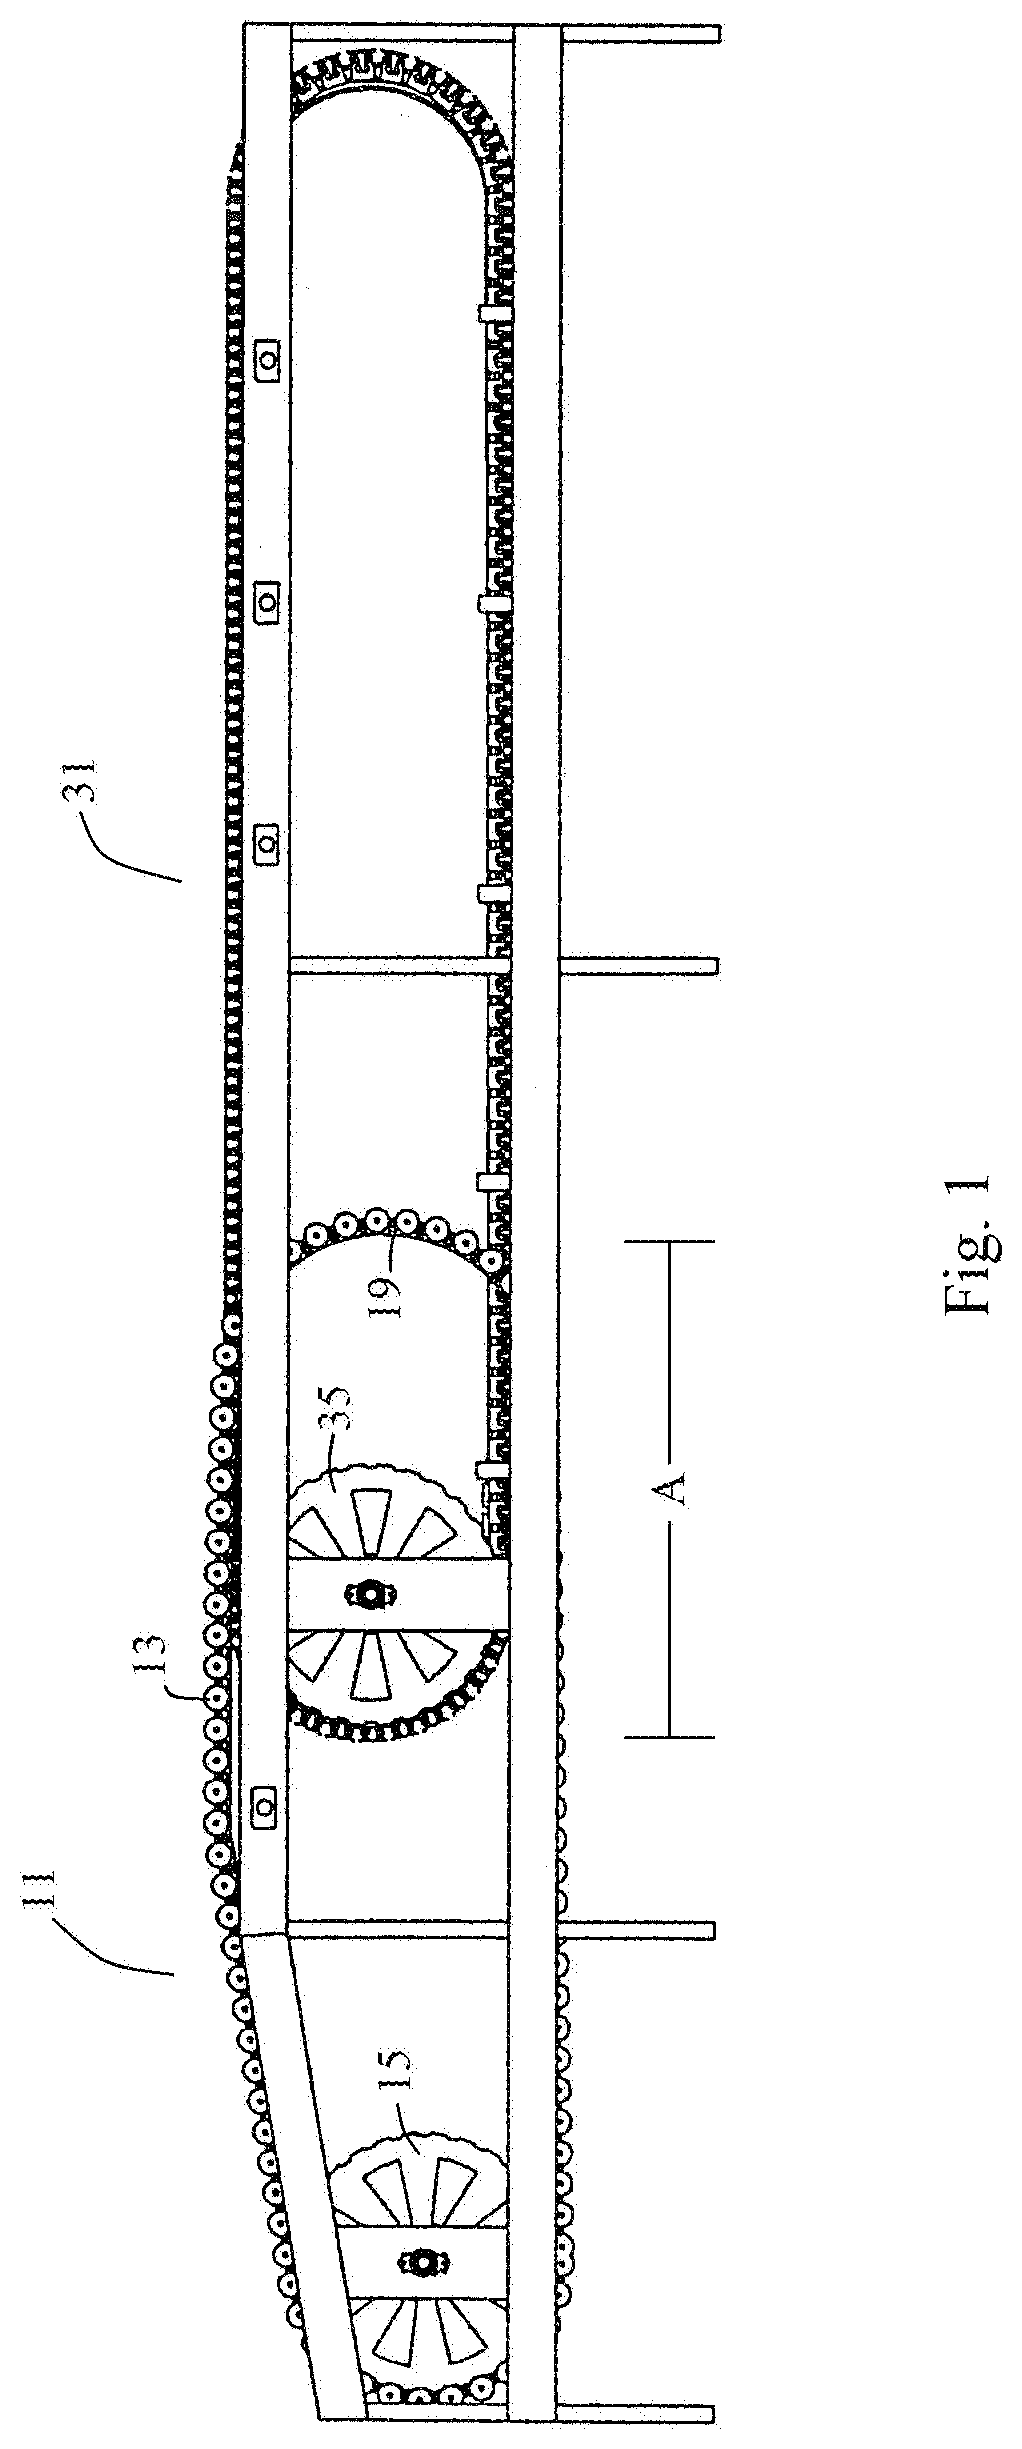 Produce conveying and sizing equipment